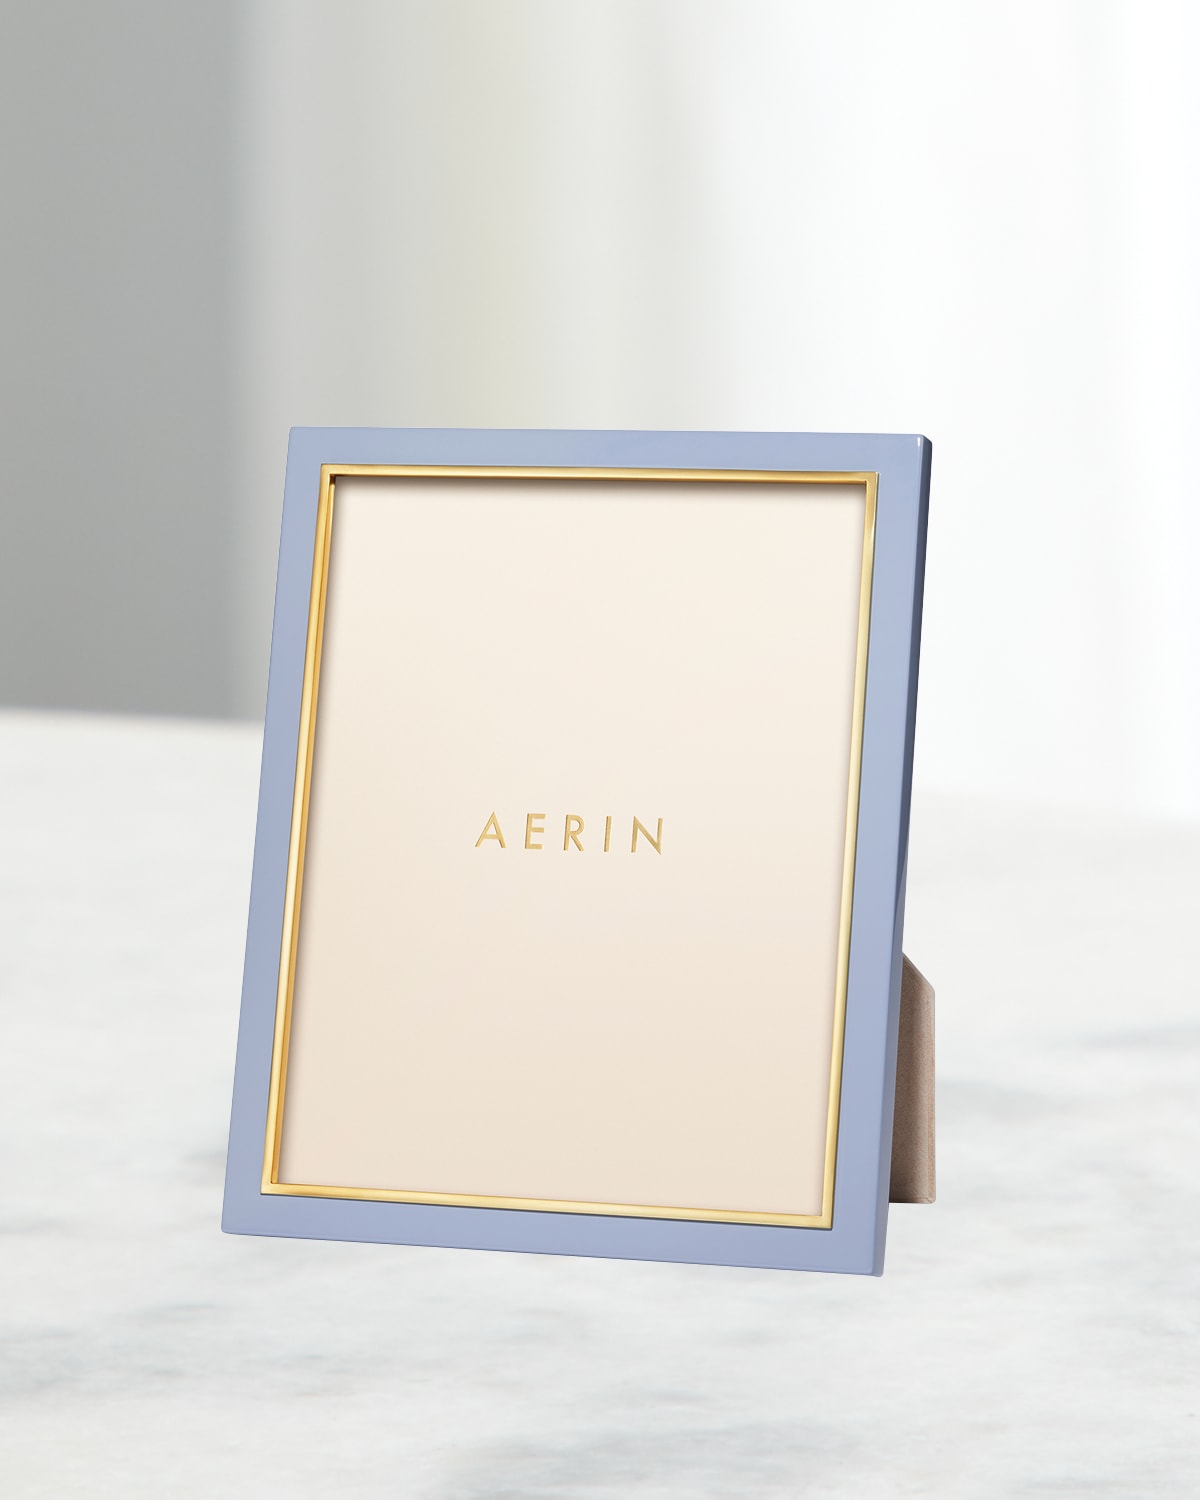 Aerin Varda Lacquer Photo Frame, French Blue - 8x10